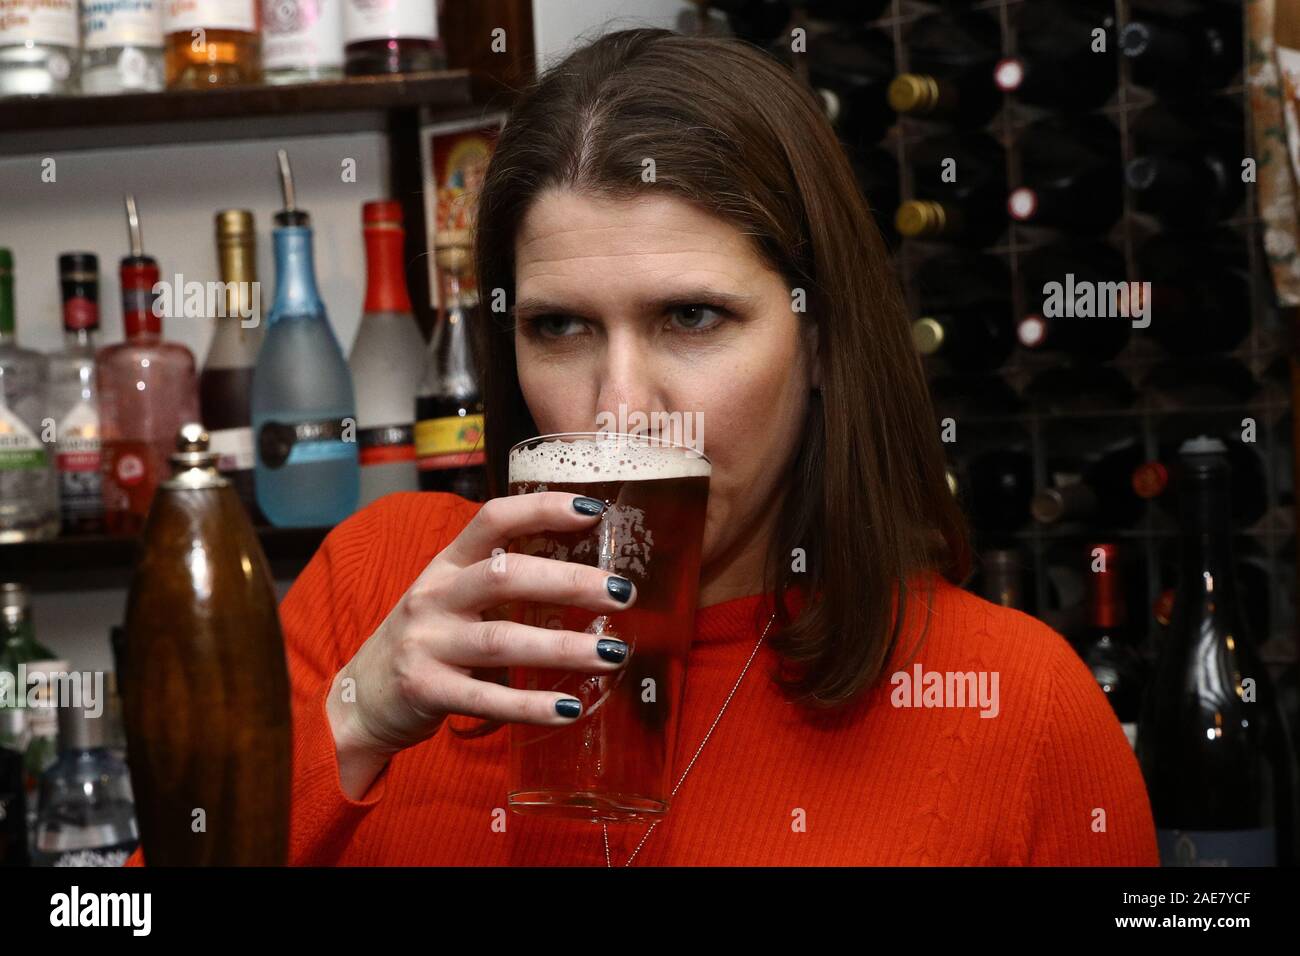 Liberal Democrat Leader Jo Swinson enjoys a pint in Dylans - The Kings Arms on Small Business Saturday during her visit to St Albans, while on the General Election campaign trail. Stock Photo